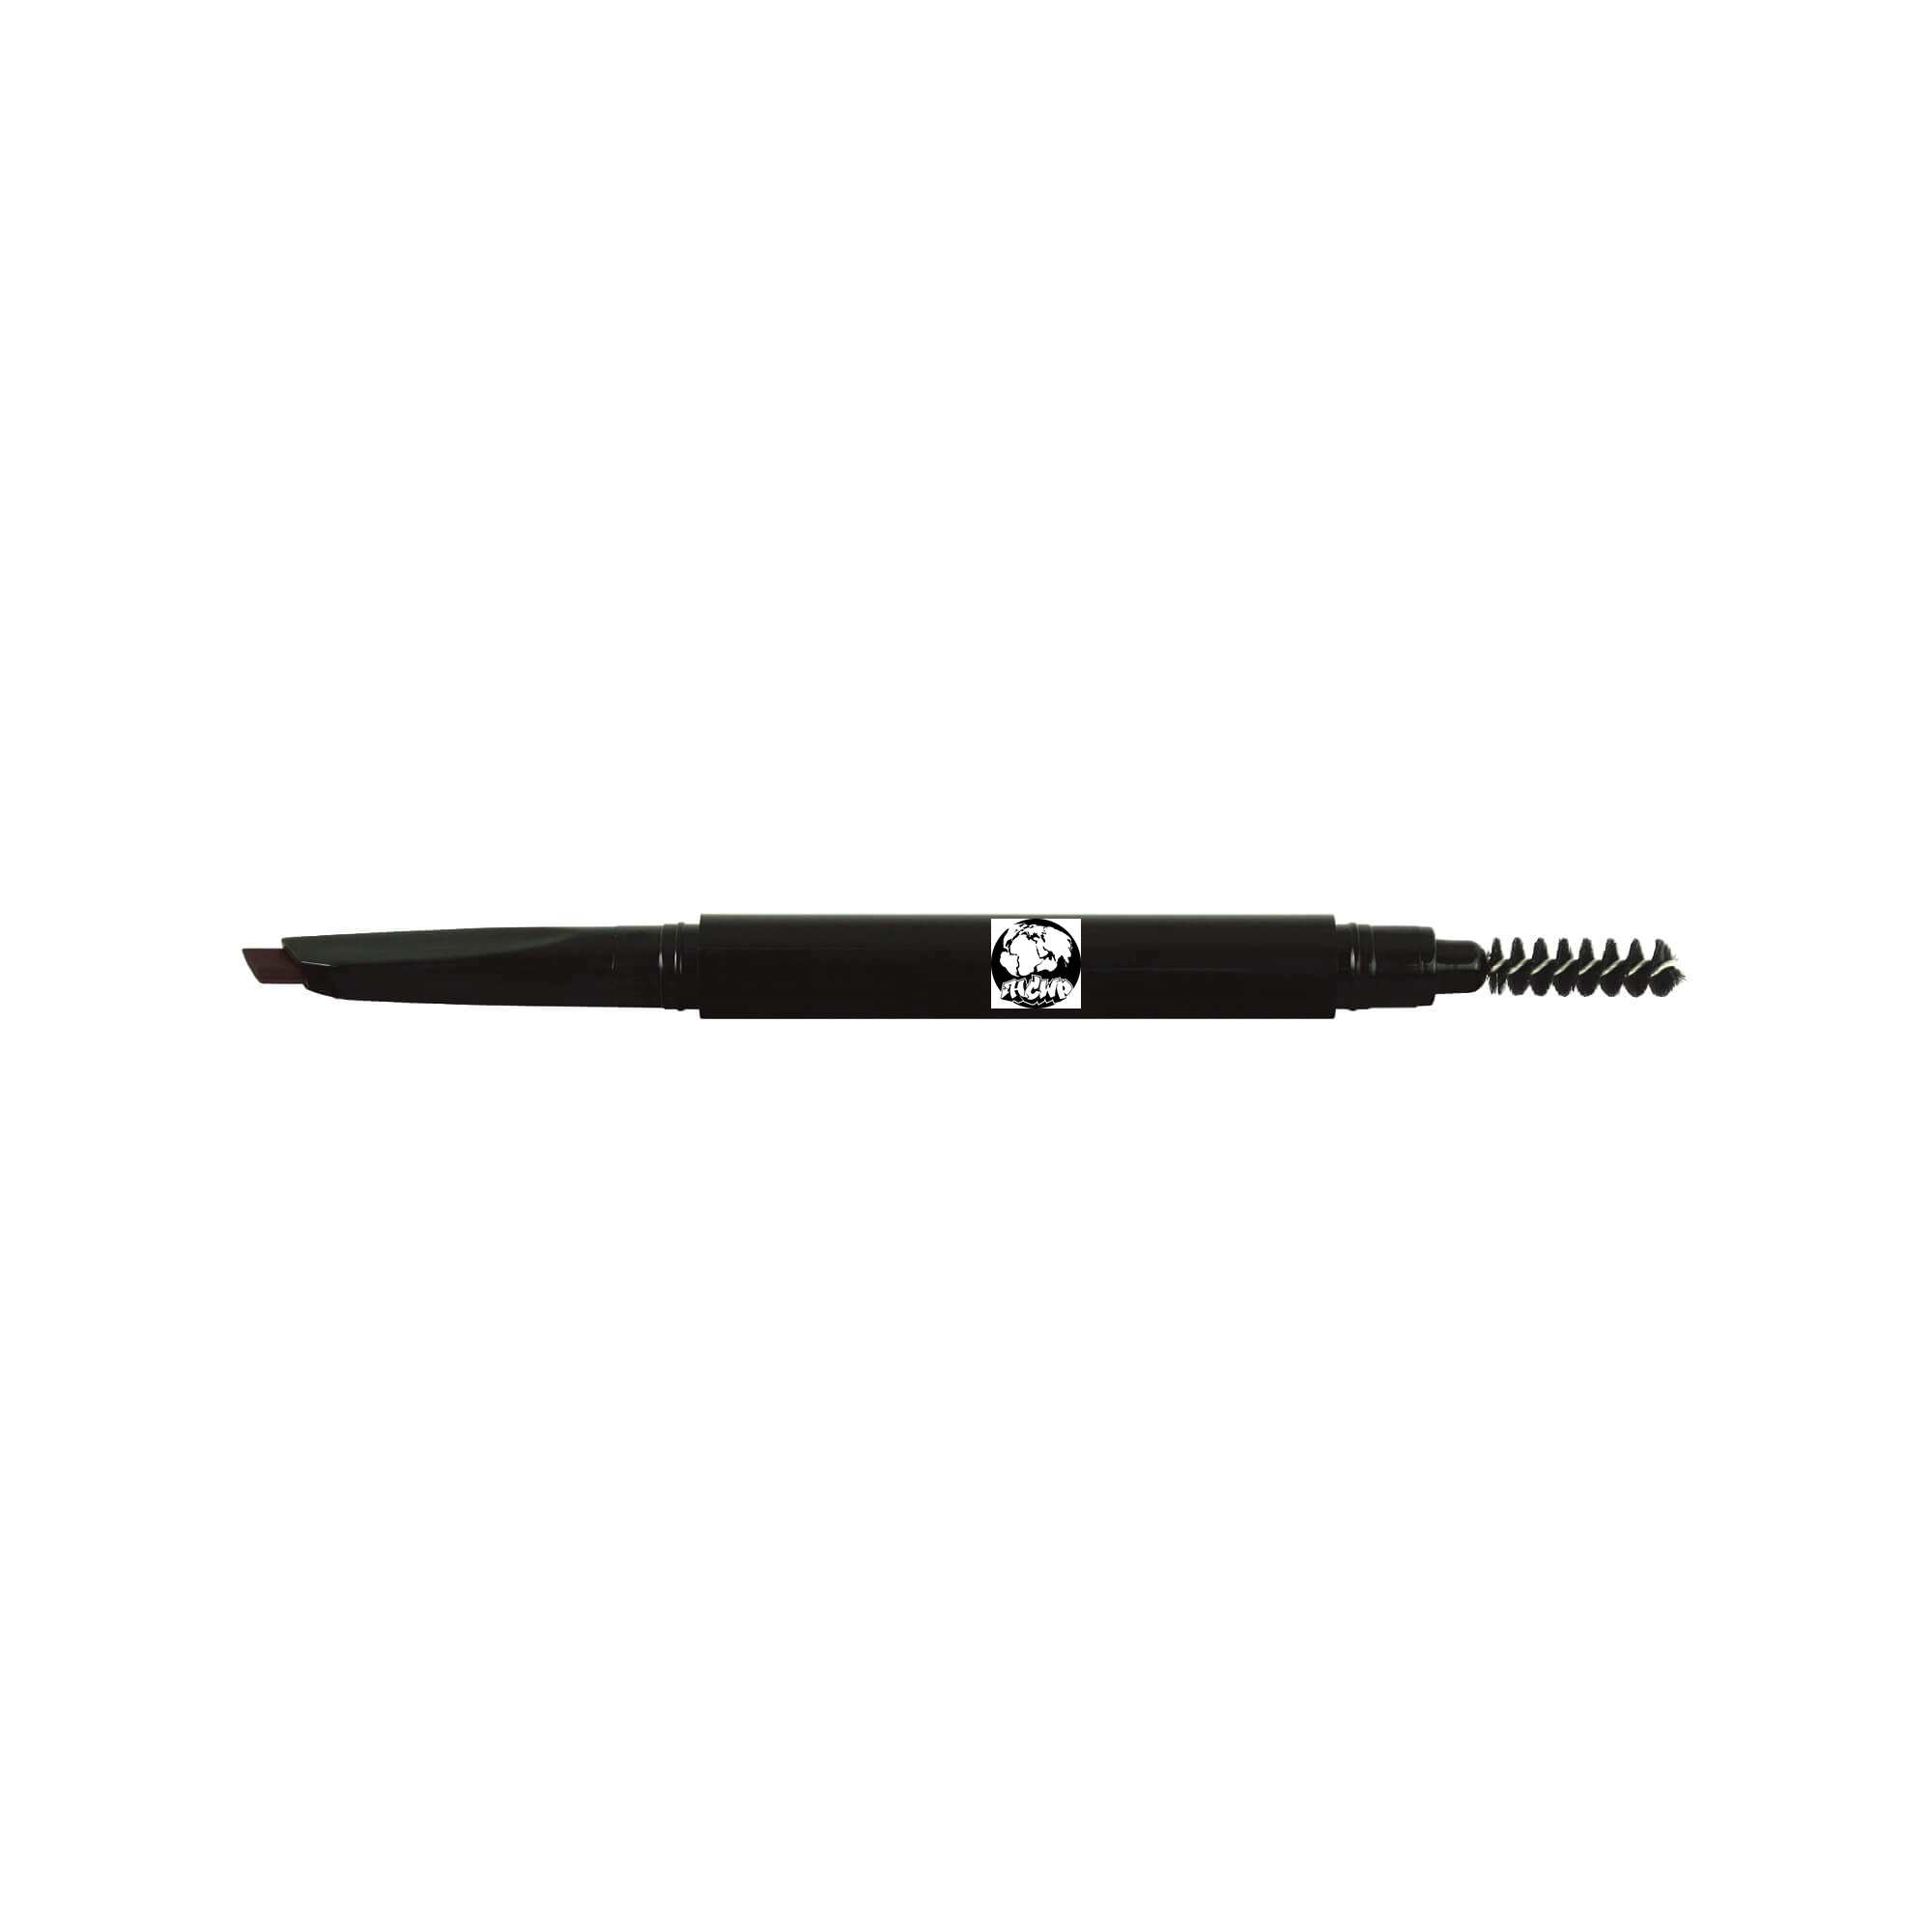 Automatic Eyebrow Pencil - Charcoal - HCWP 